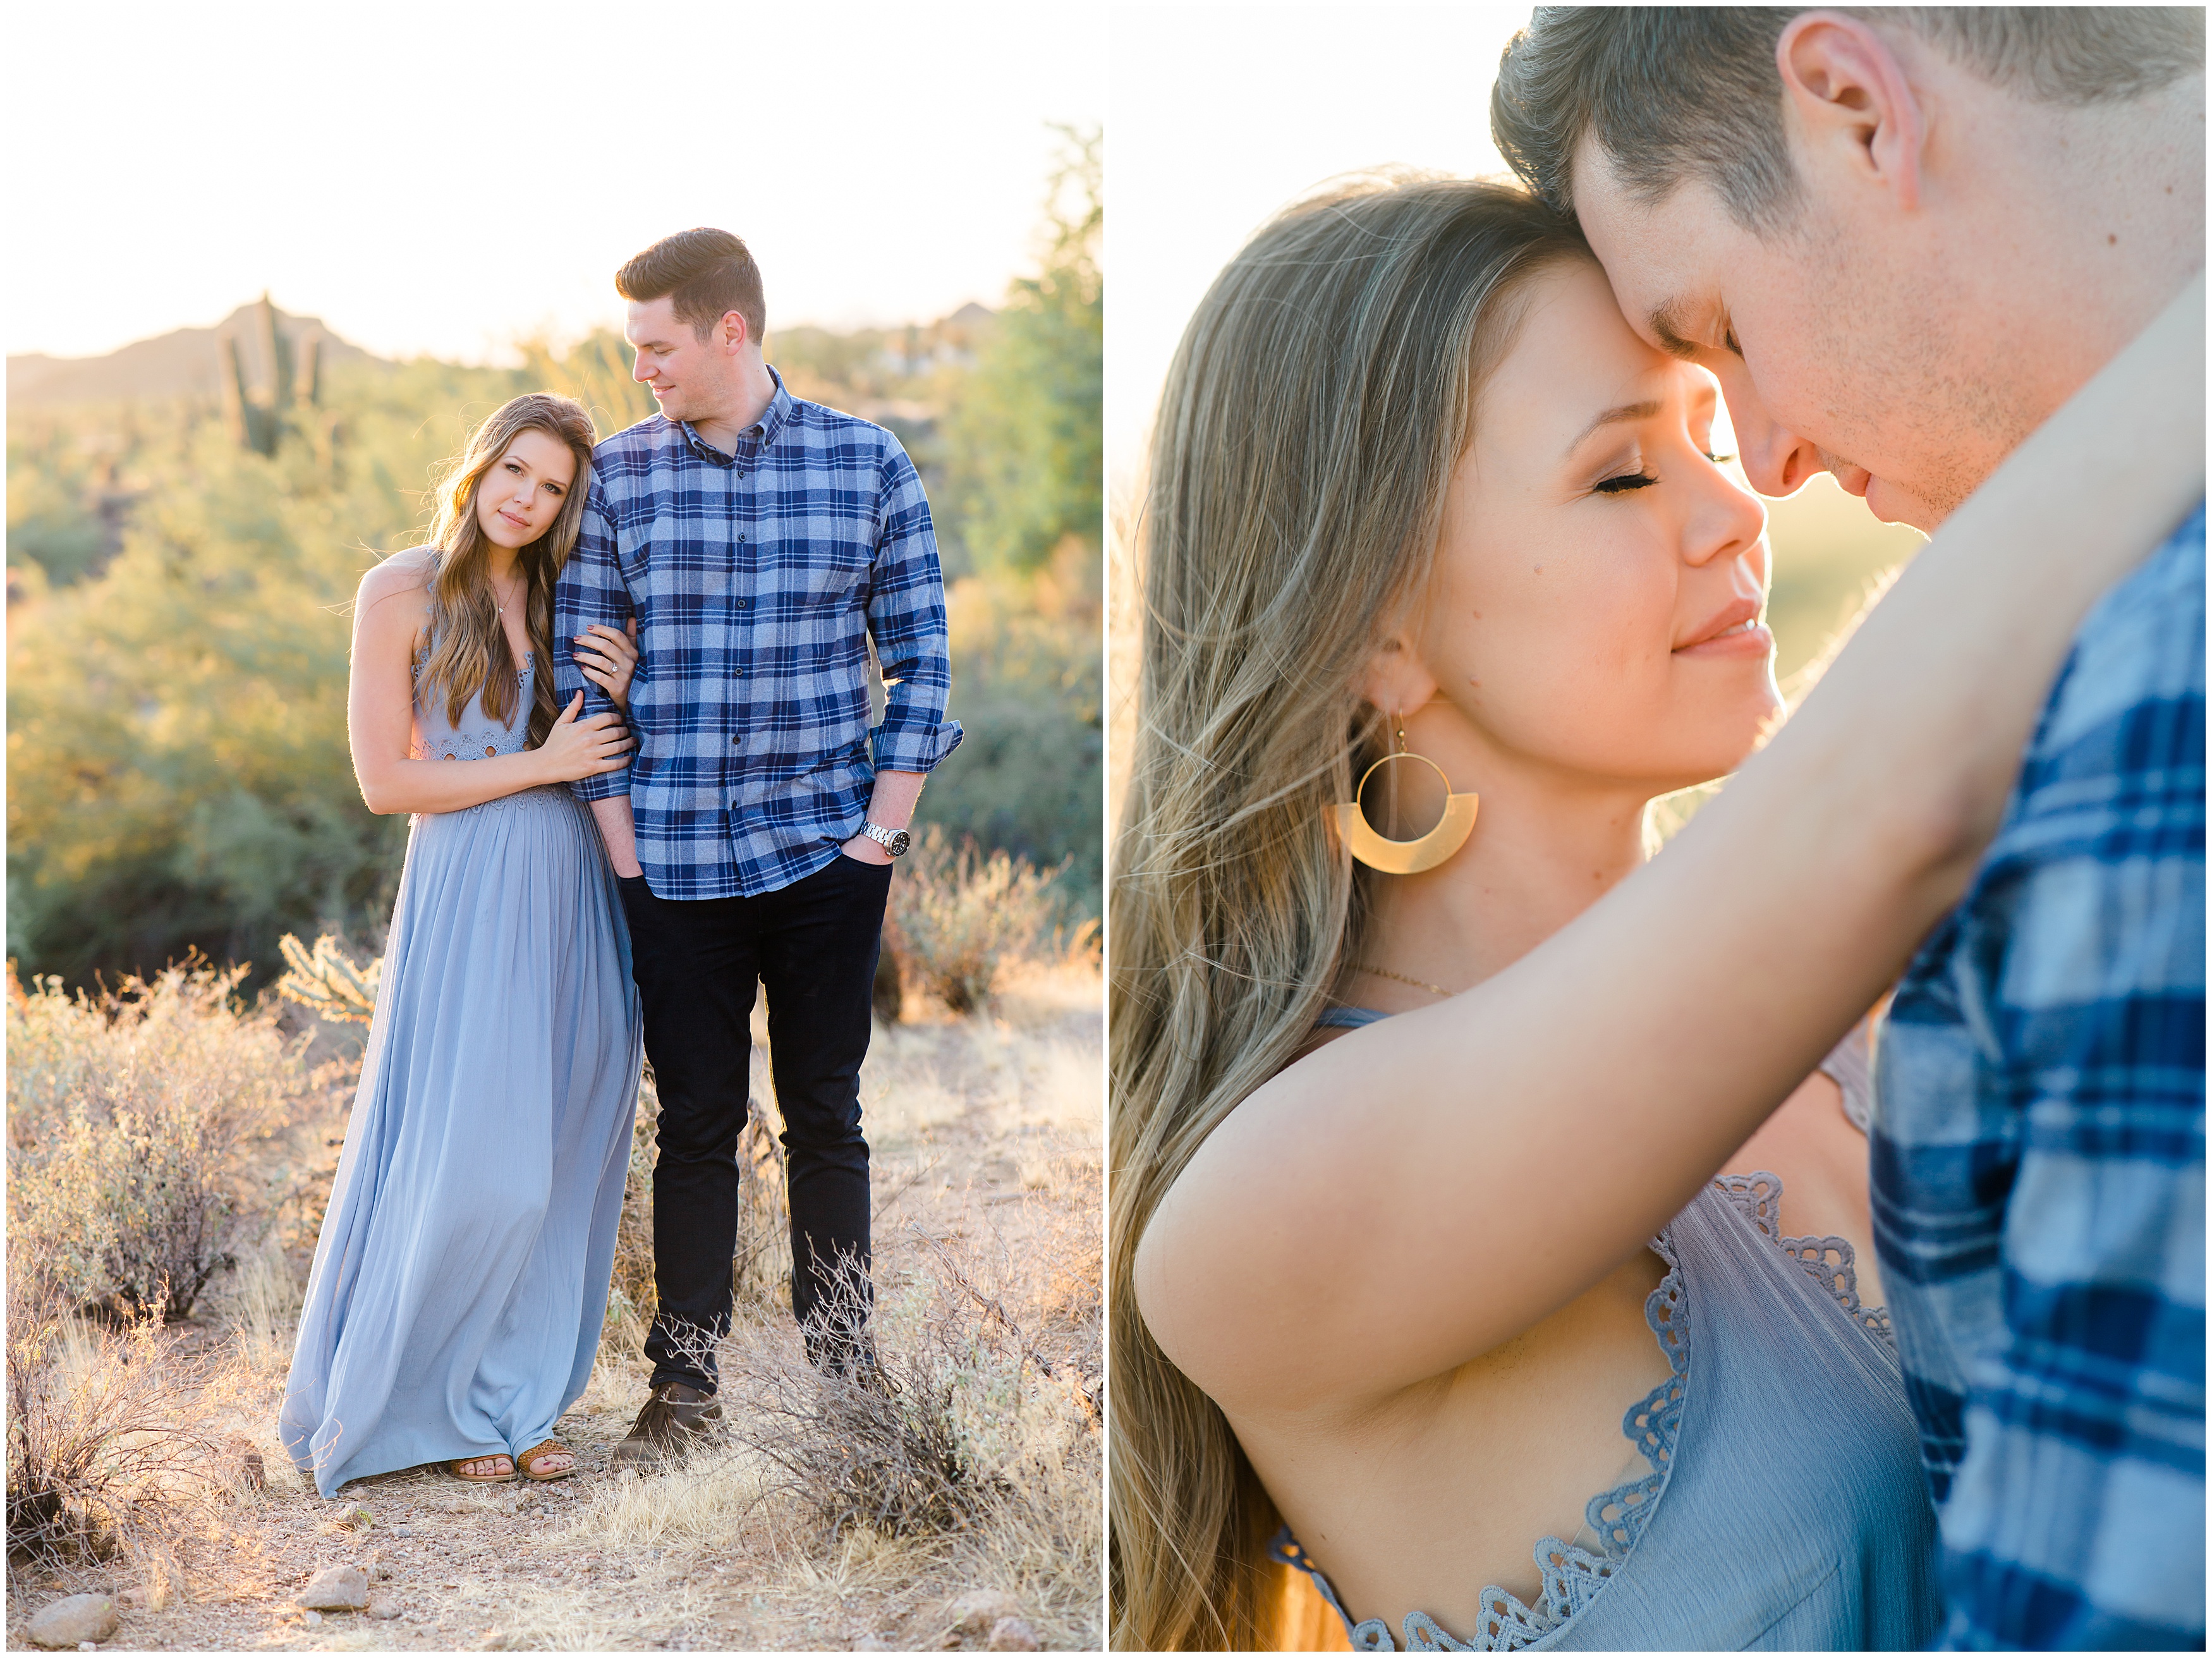 A gorgeous sunset anniversary session in Scottsdale, Arizona by photographer Courtney Bosworth